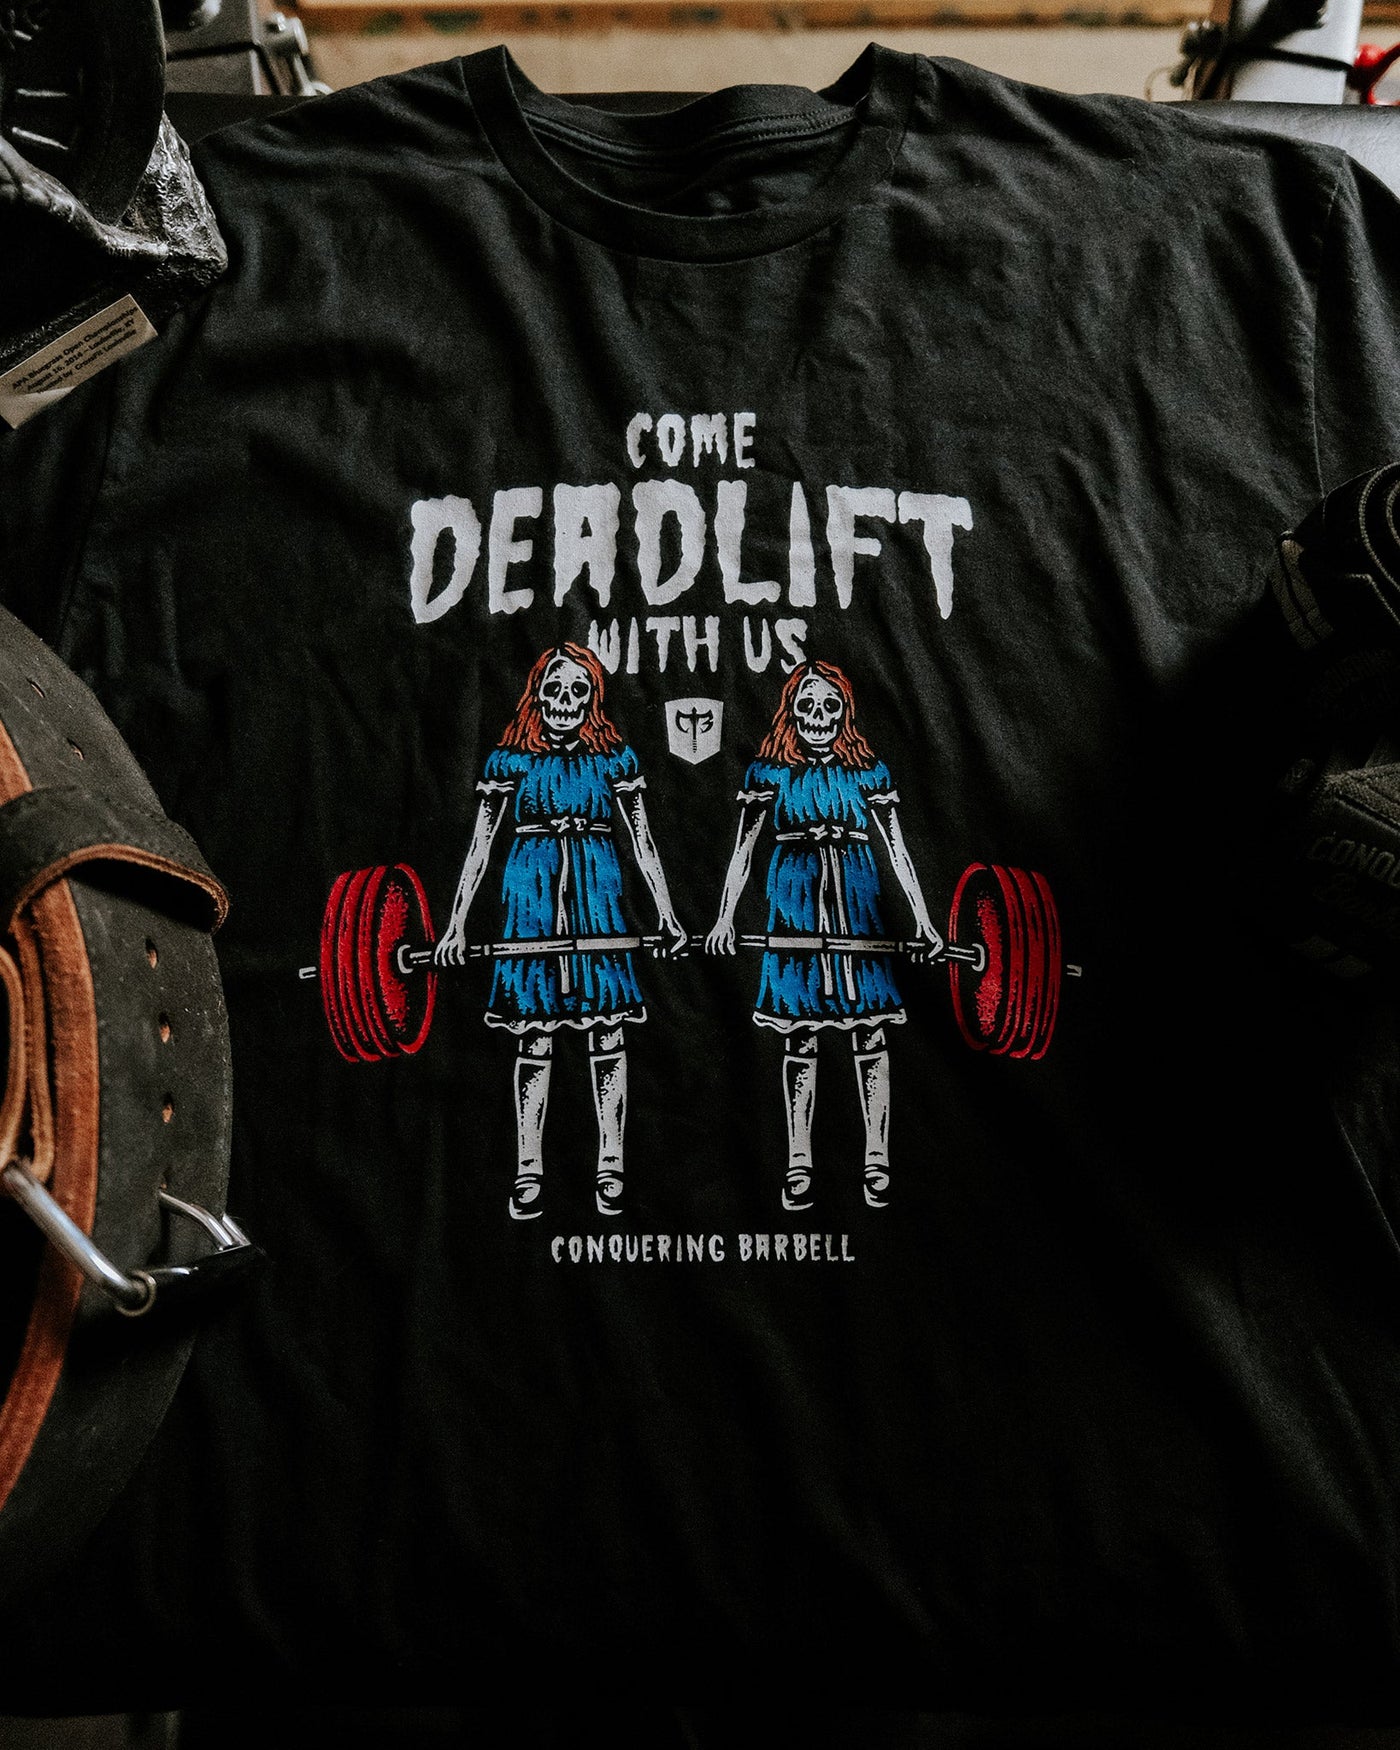 Come Deadlift With Us - on Black tee - Conquering Barbell